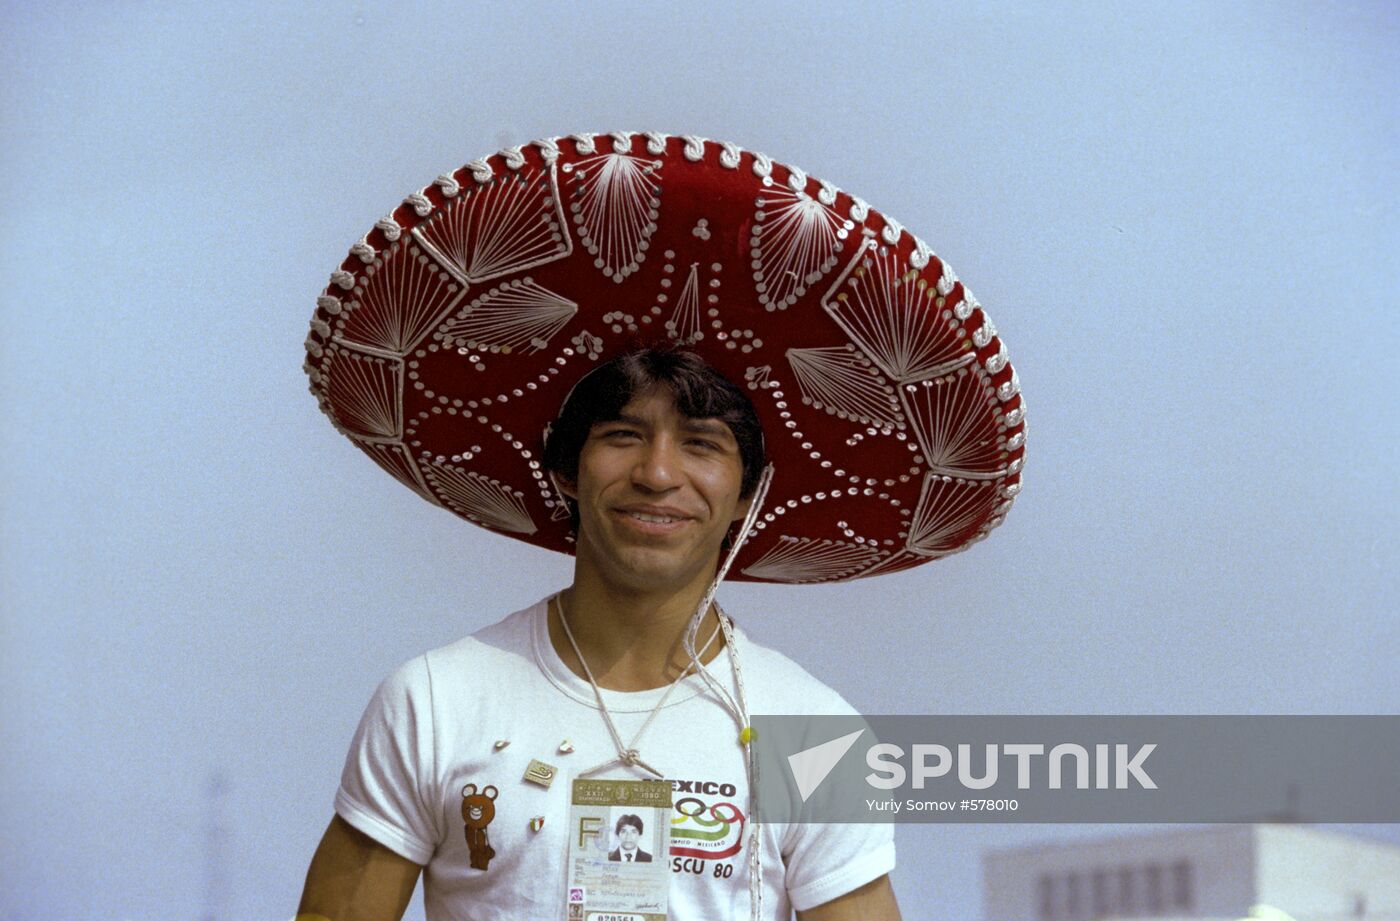 Mexican sportsman at 1980 Olympics